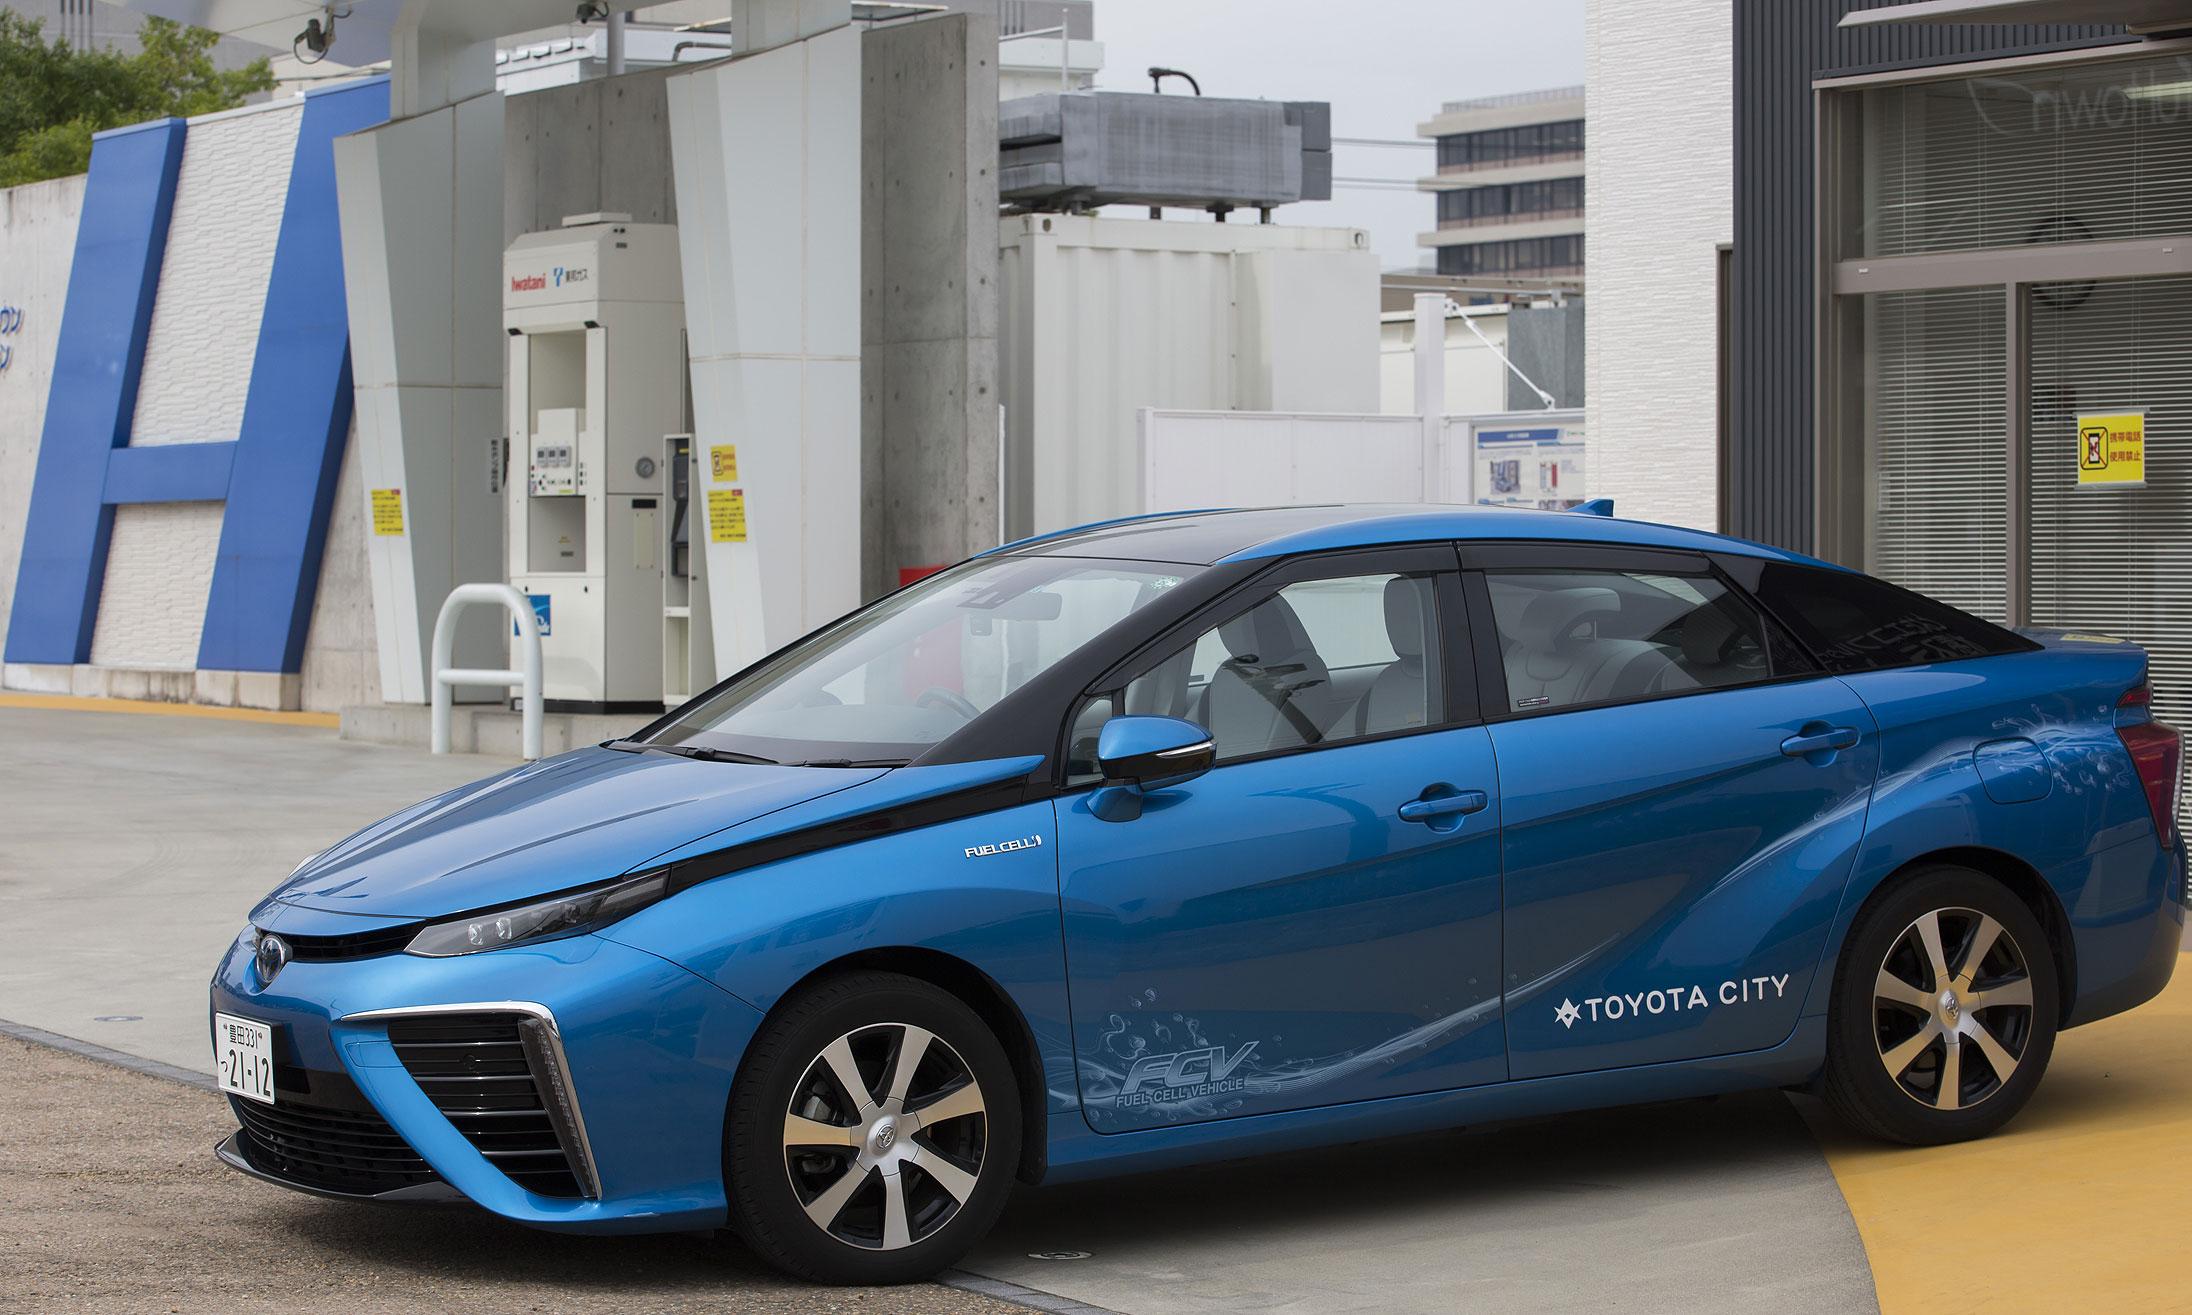 Toyota 2021 hydrogen fuel cell vehicle Mirai will be launched in December